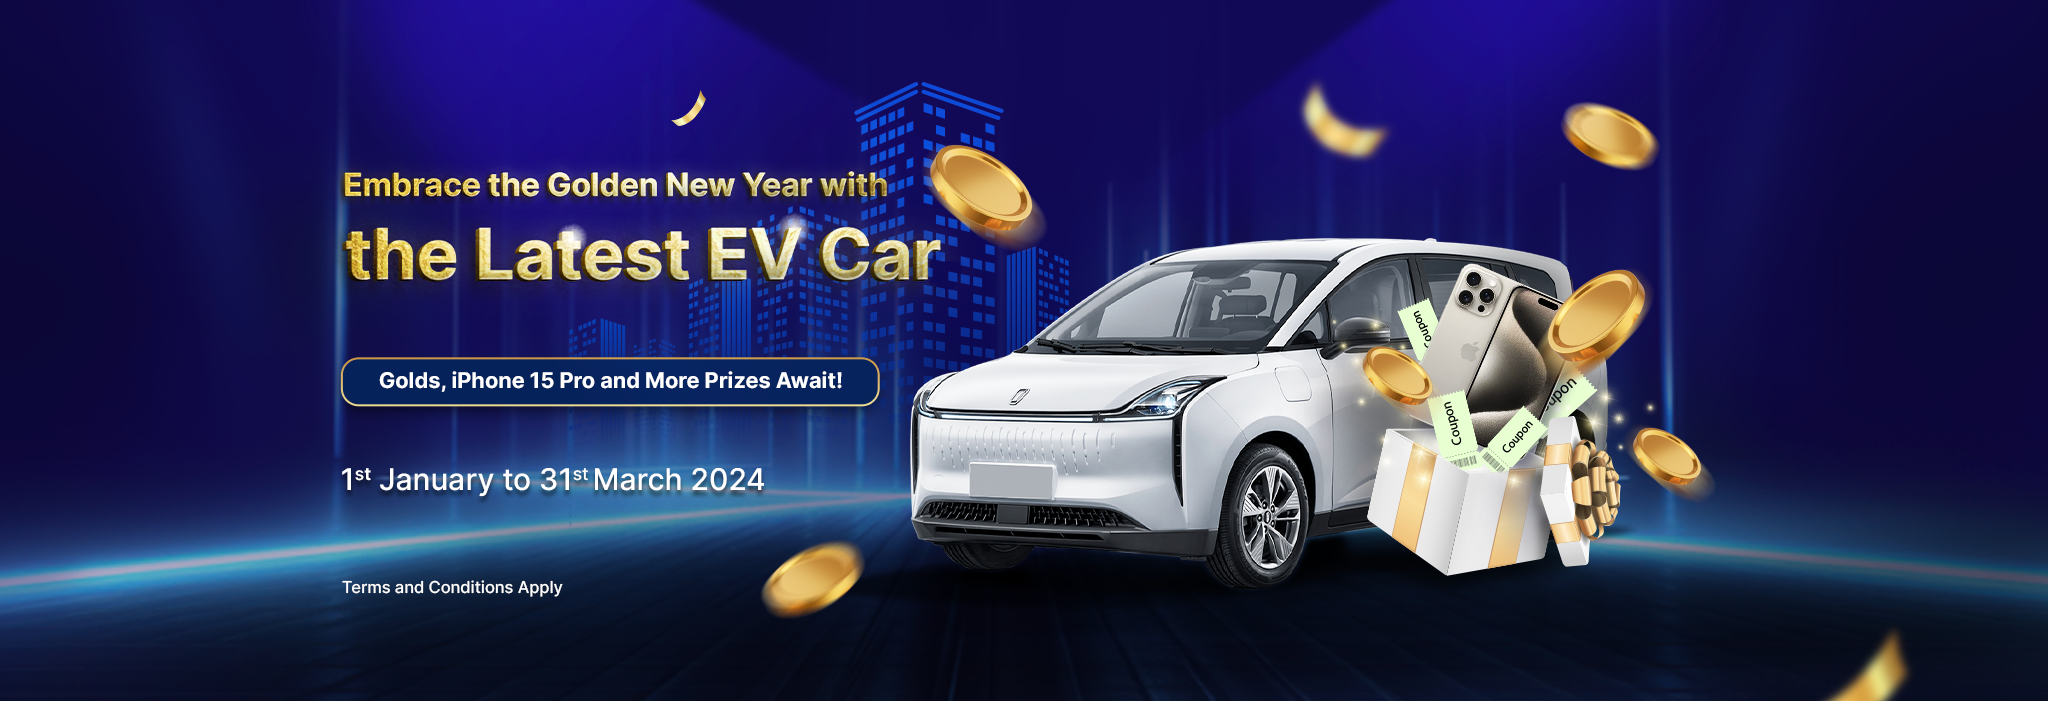 KBZ Embrace the Golden New Year with the Latest EV Car